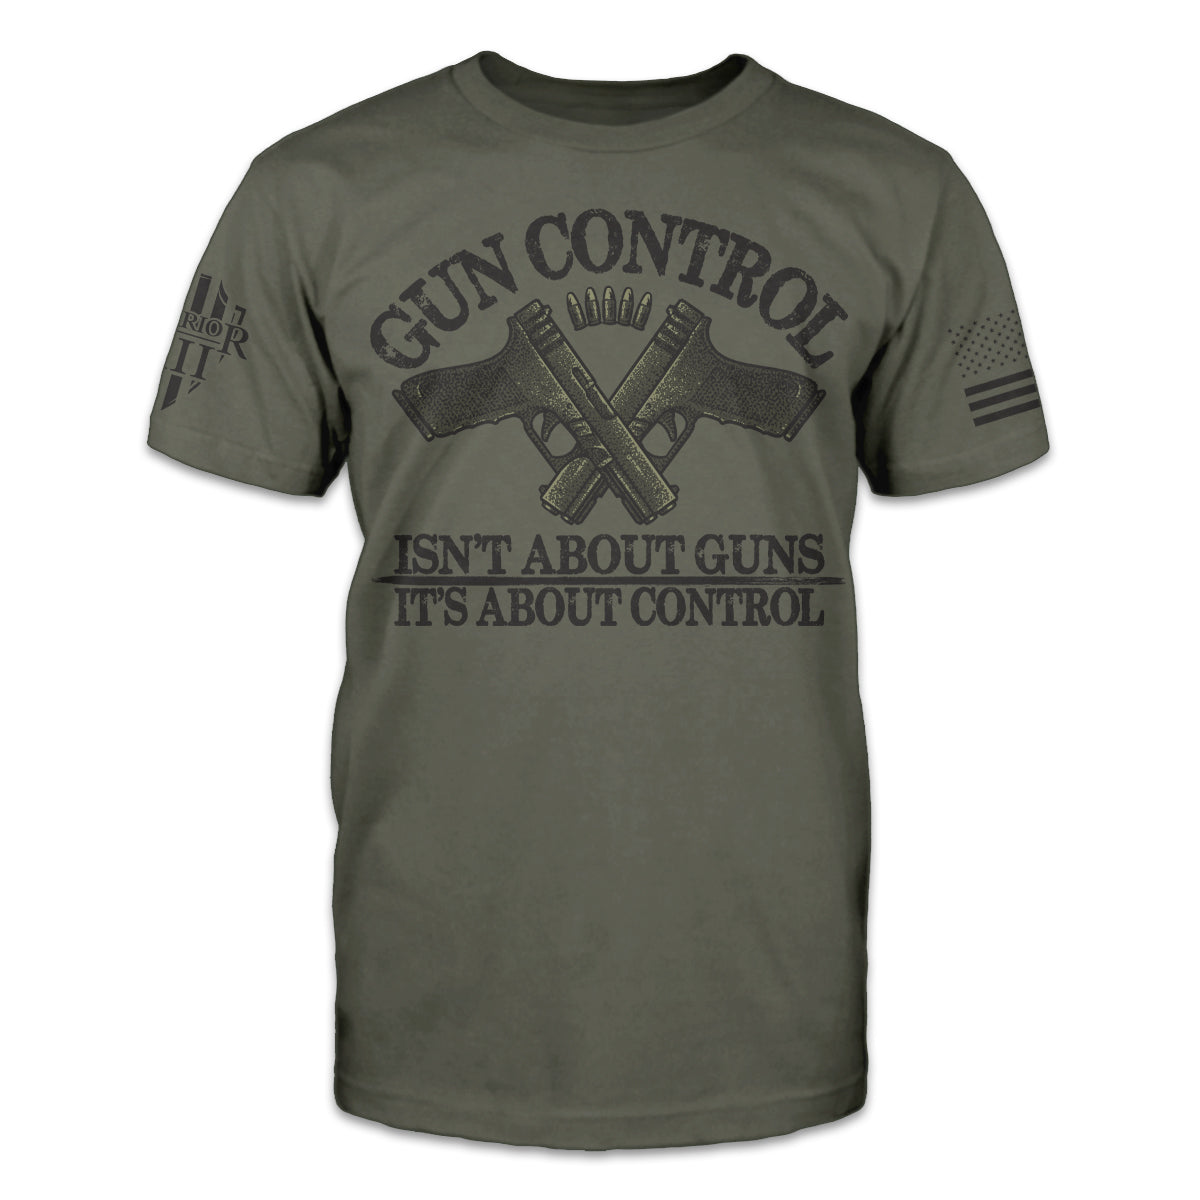 An olive green t-shirt with the words "Gun control isn't about guns, it's about control" and two guns crossed over printed on the front of the shirt.